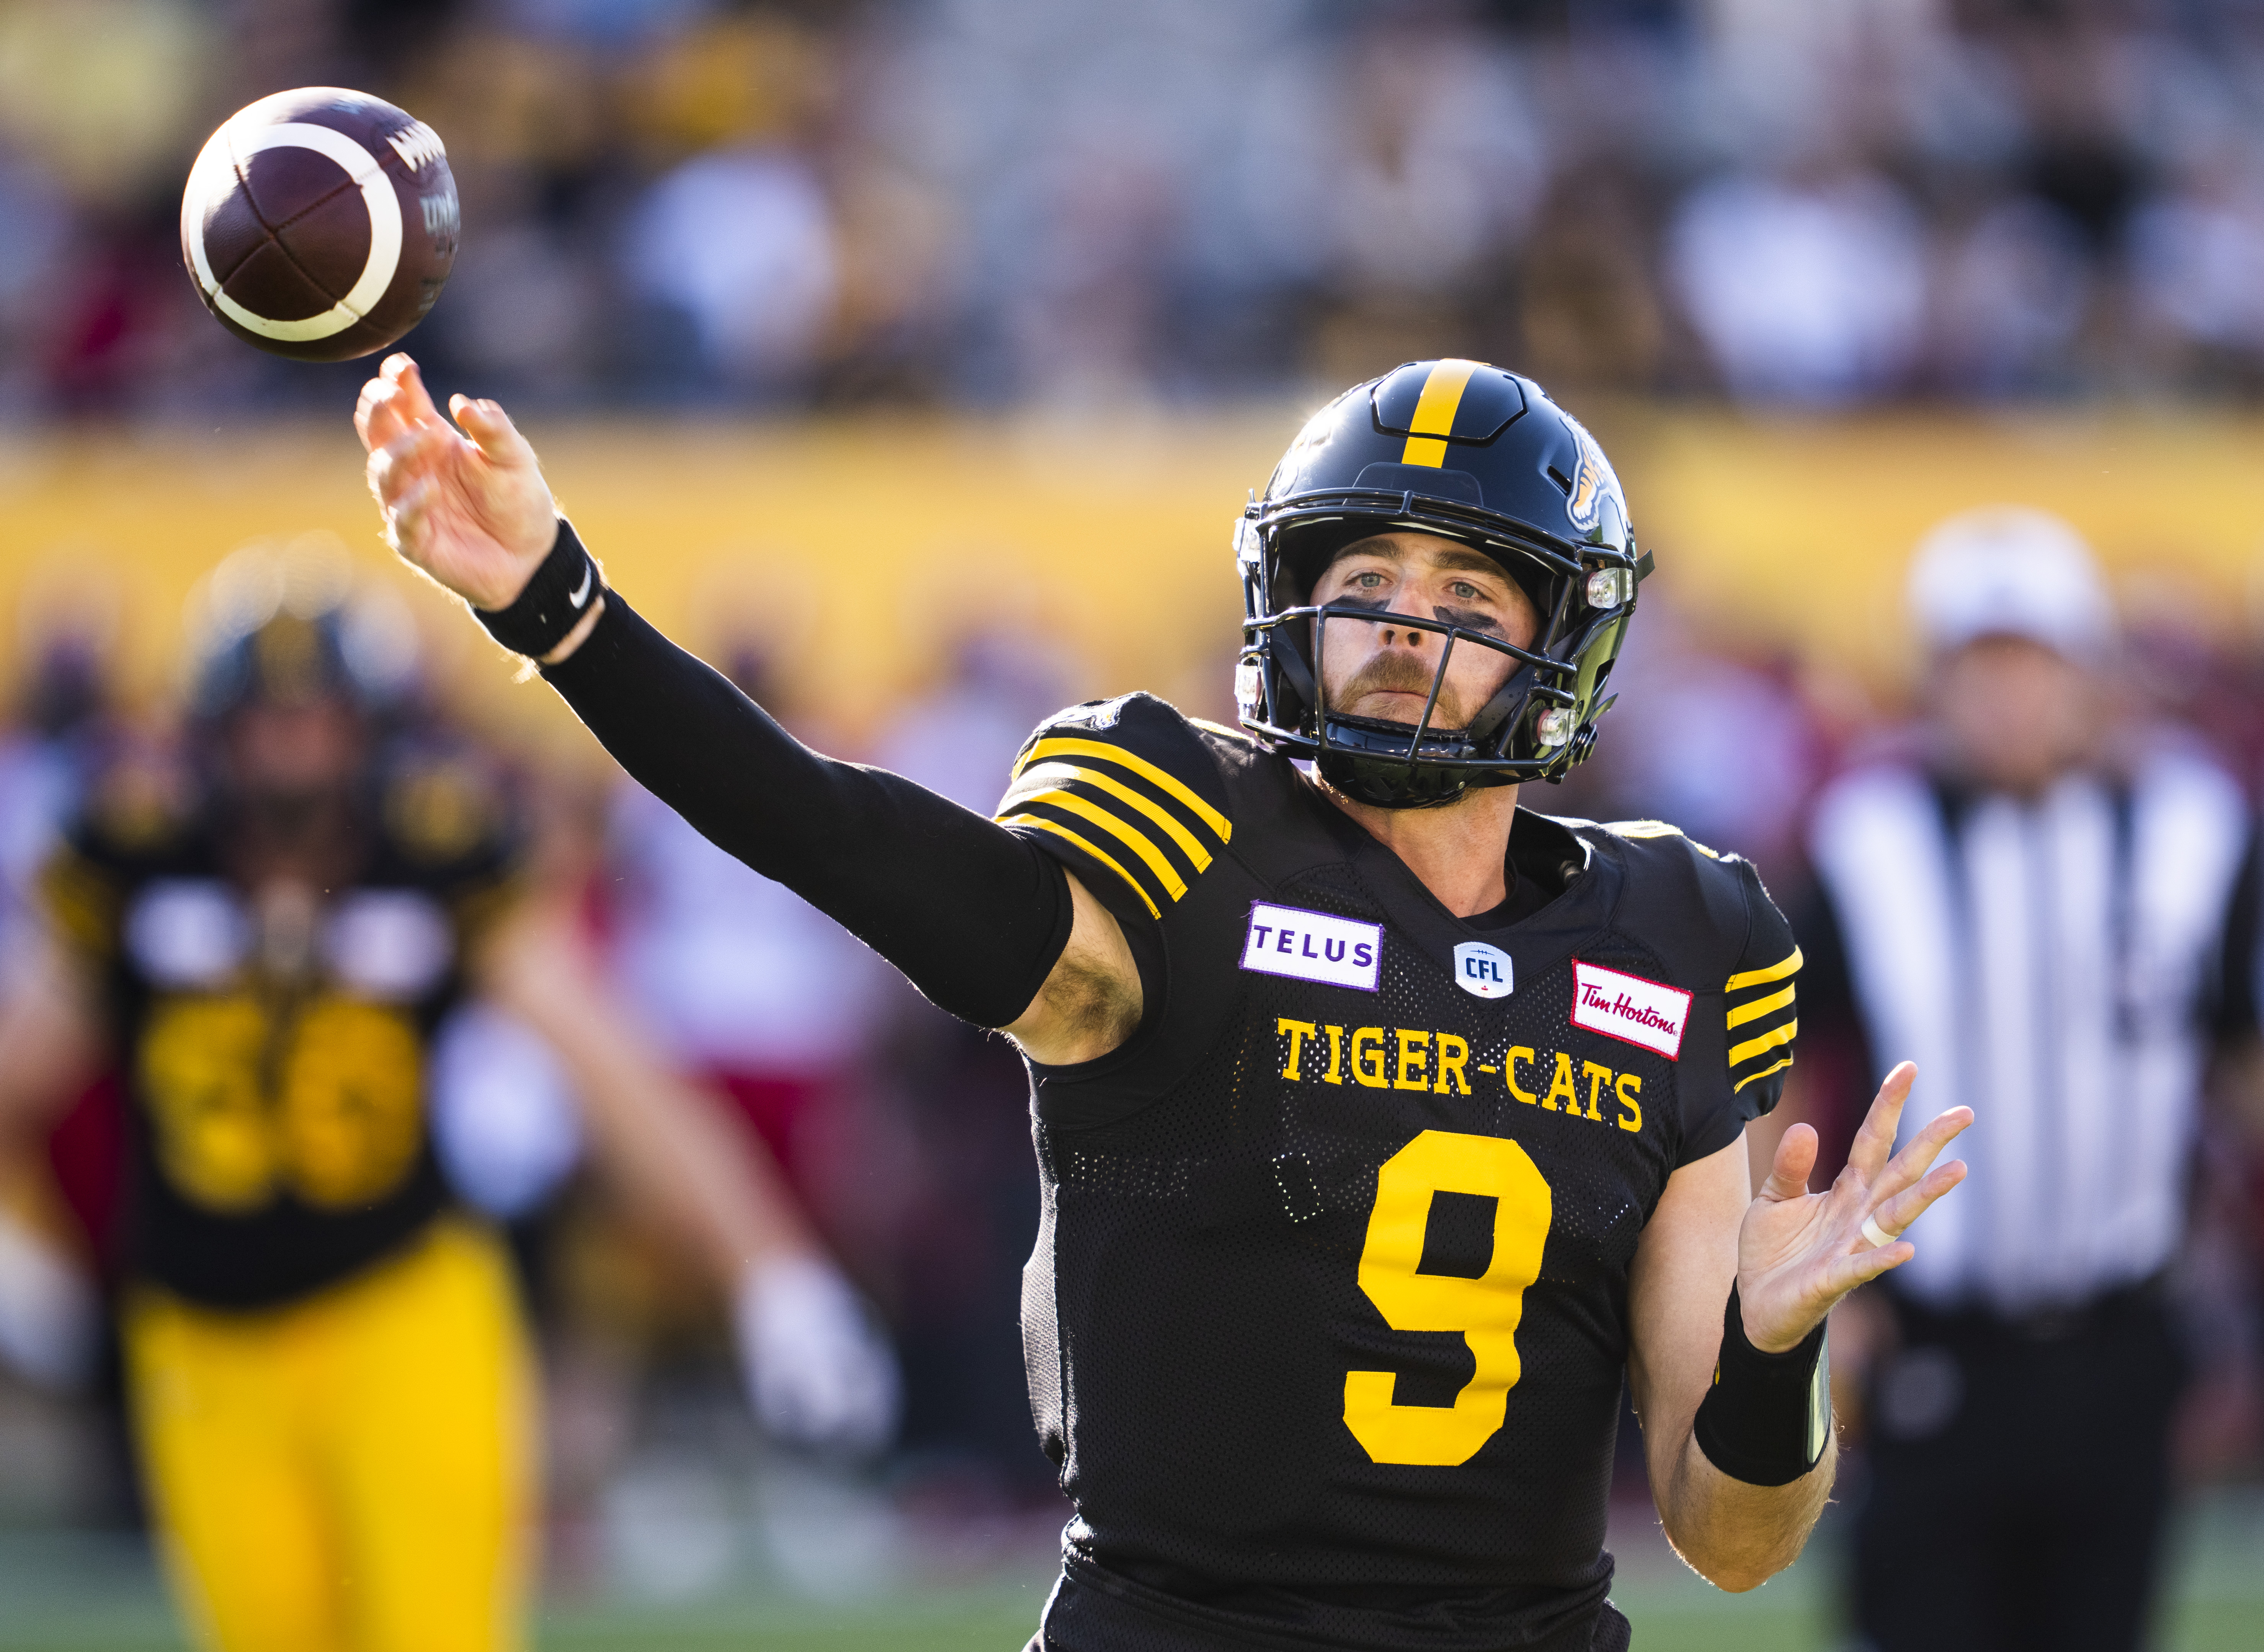 Hamilton Tiger-Cats search for first road win in massive tilt in Montreal